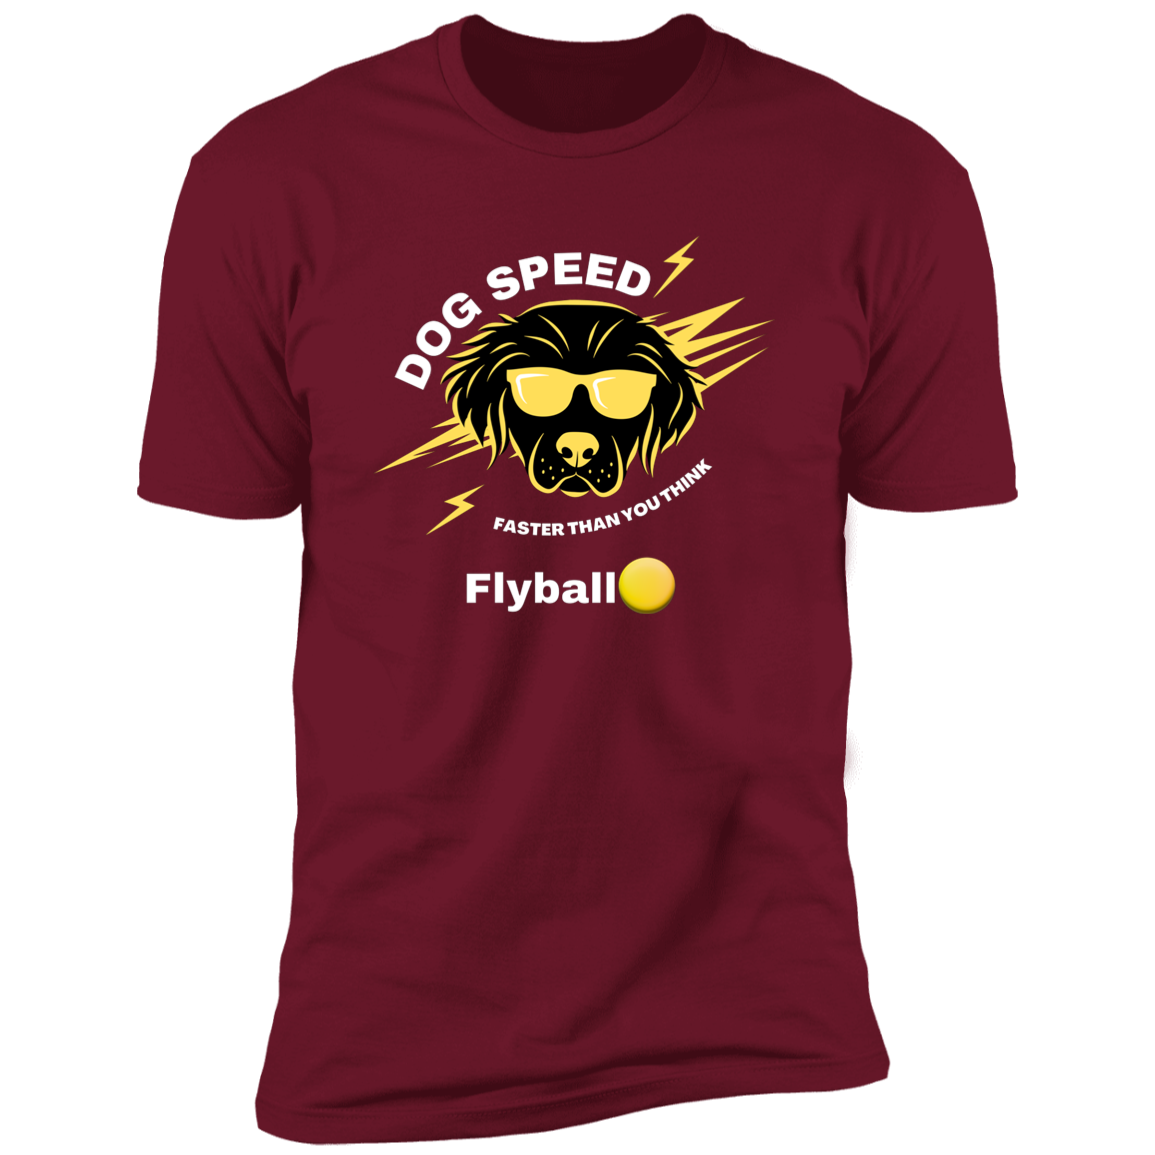 Dog Speed Faster Than You Think Flyball T-shirt, Flyball shirt dog shirt for humans, in cardinal red